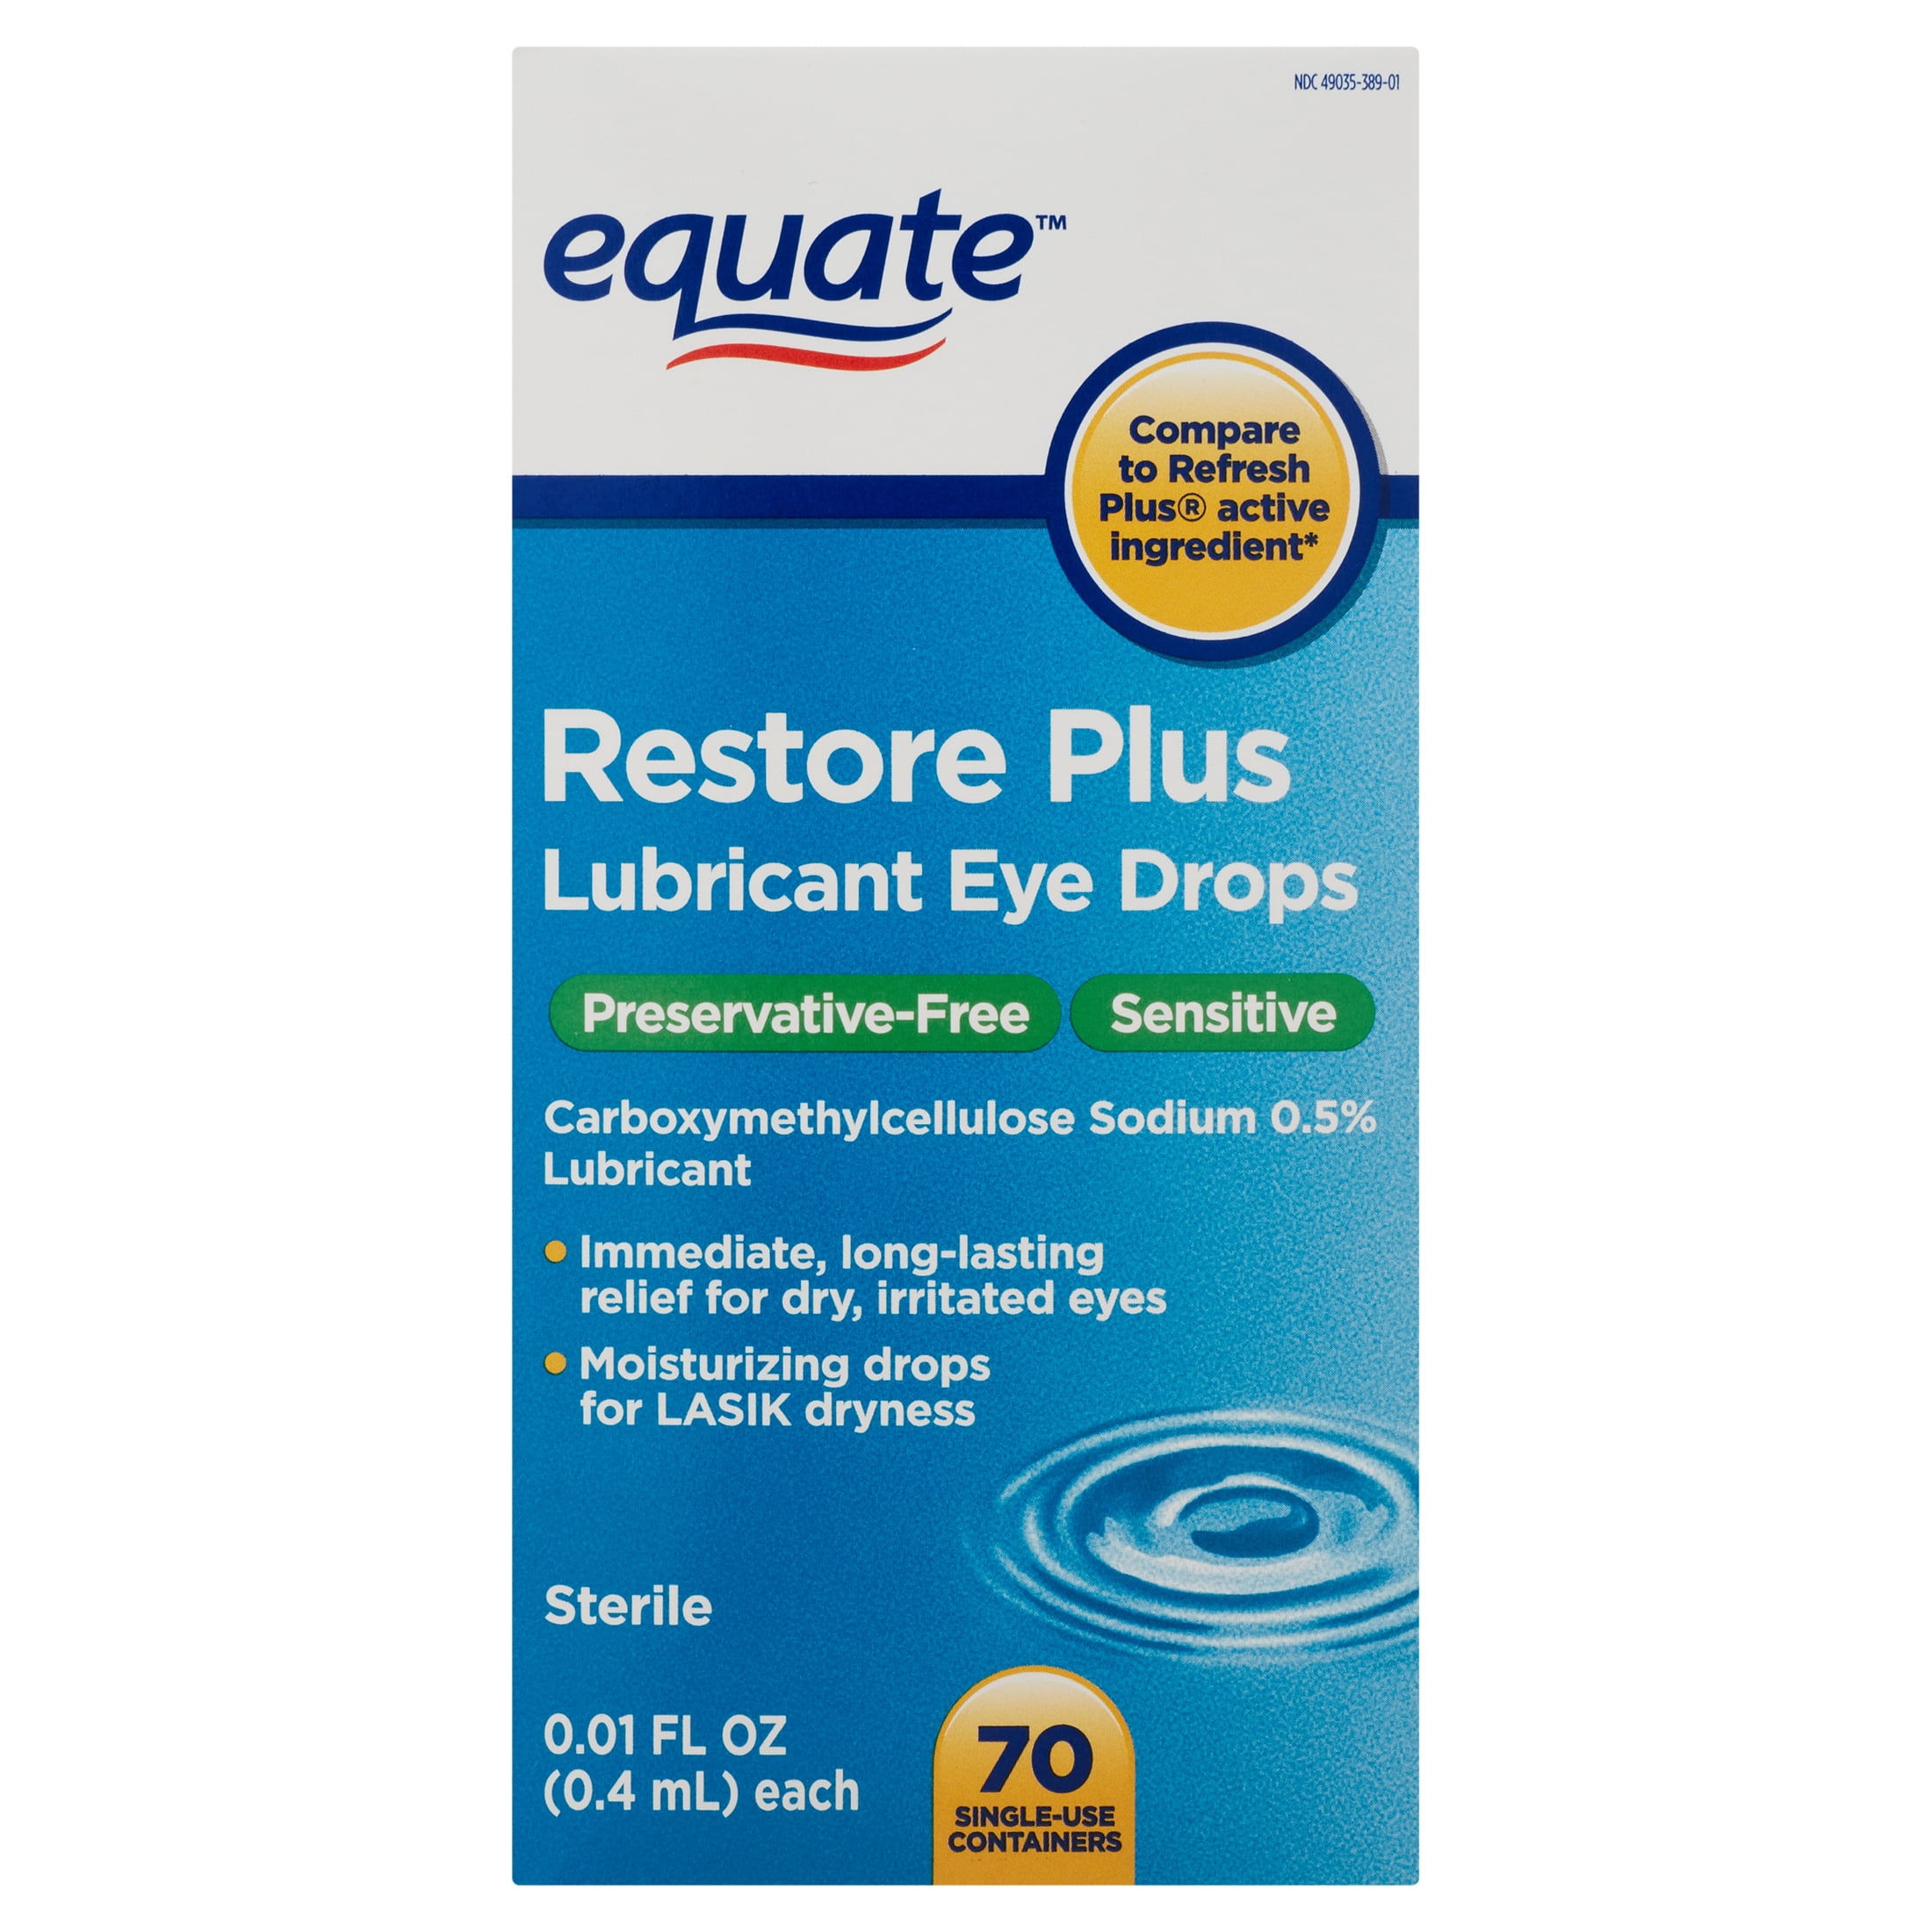 Equate Restore Plus Carboxymethylcellulose Sodium Lubricant Eye Drops